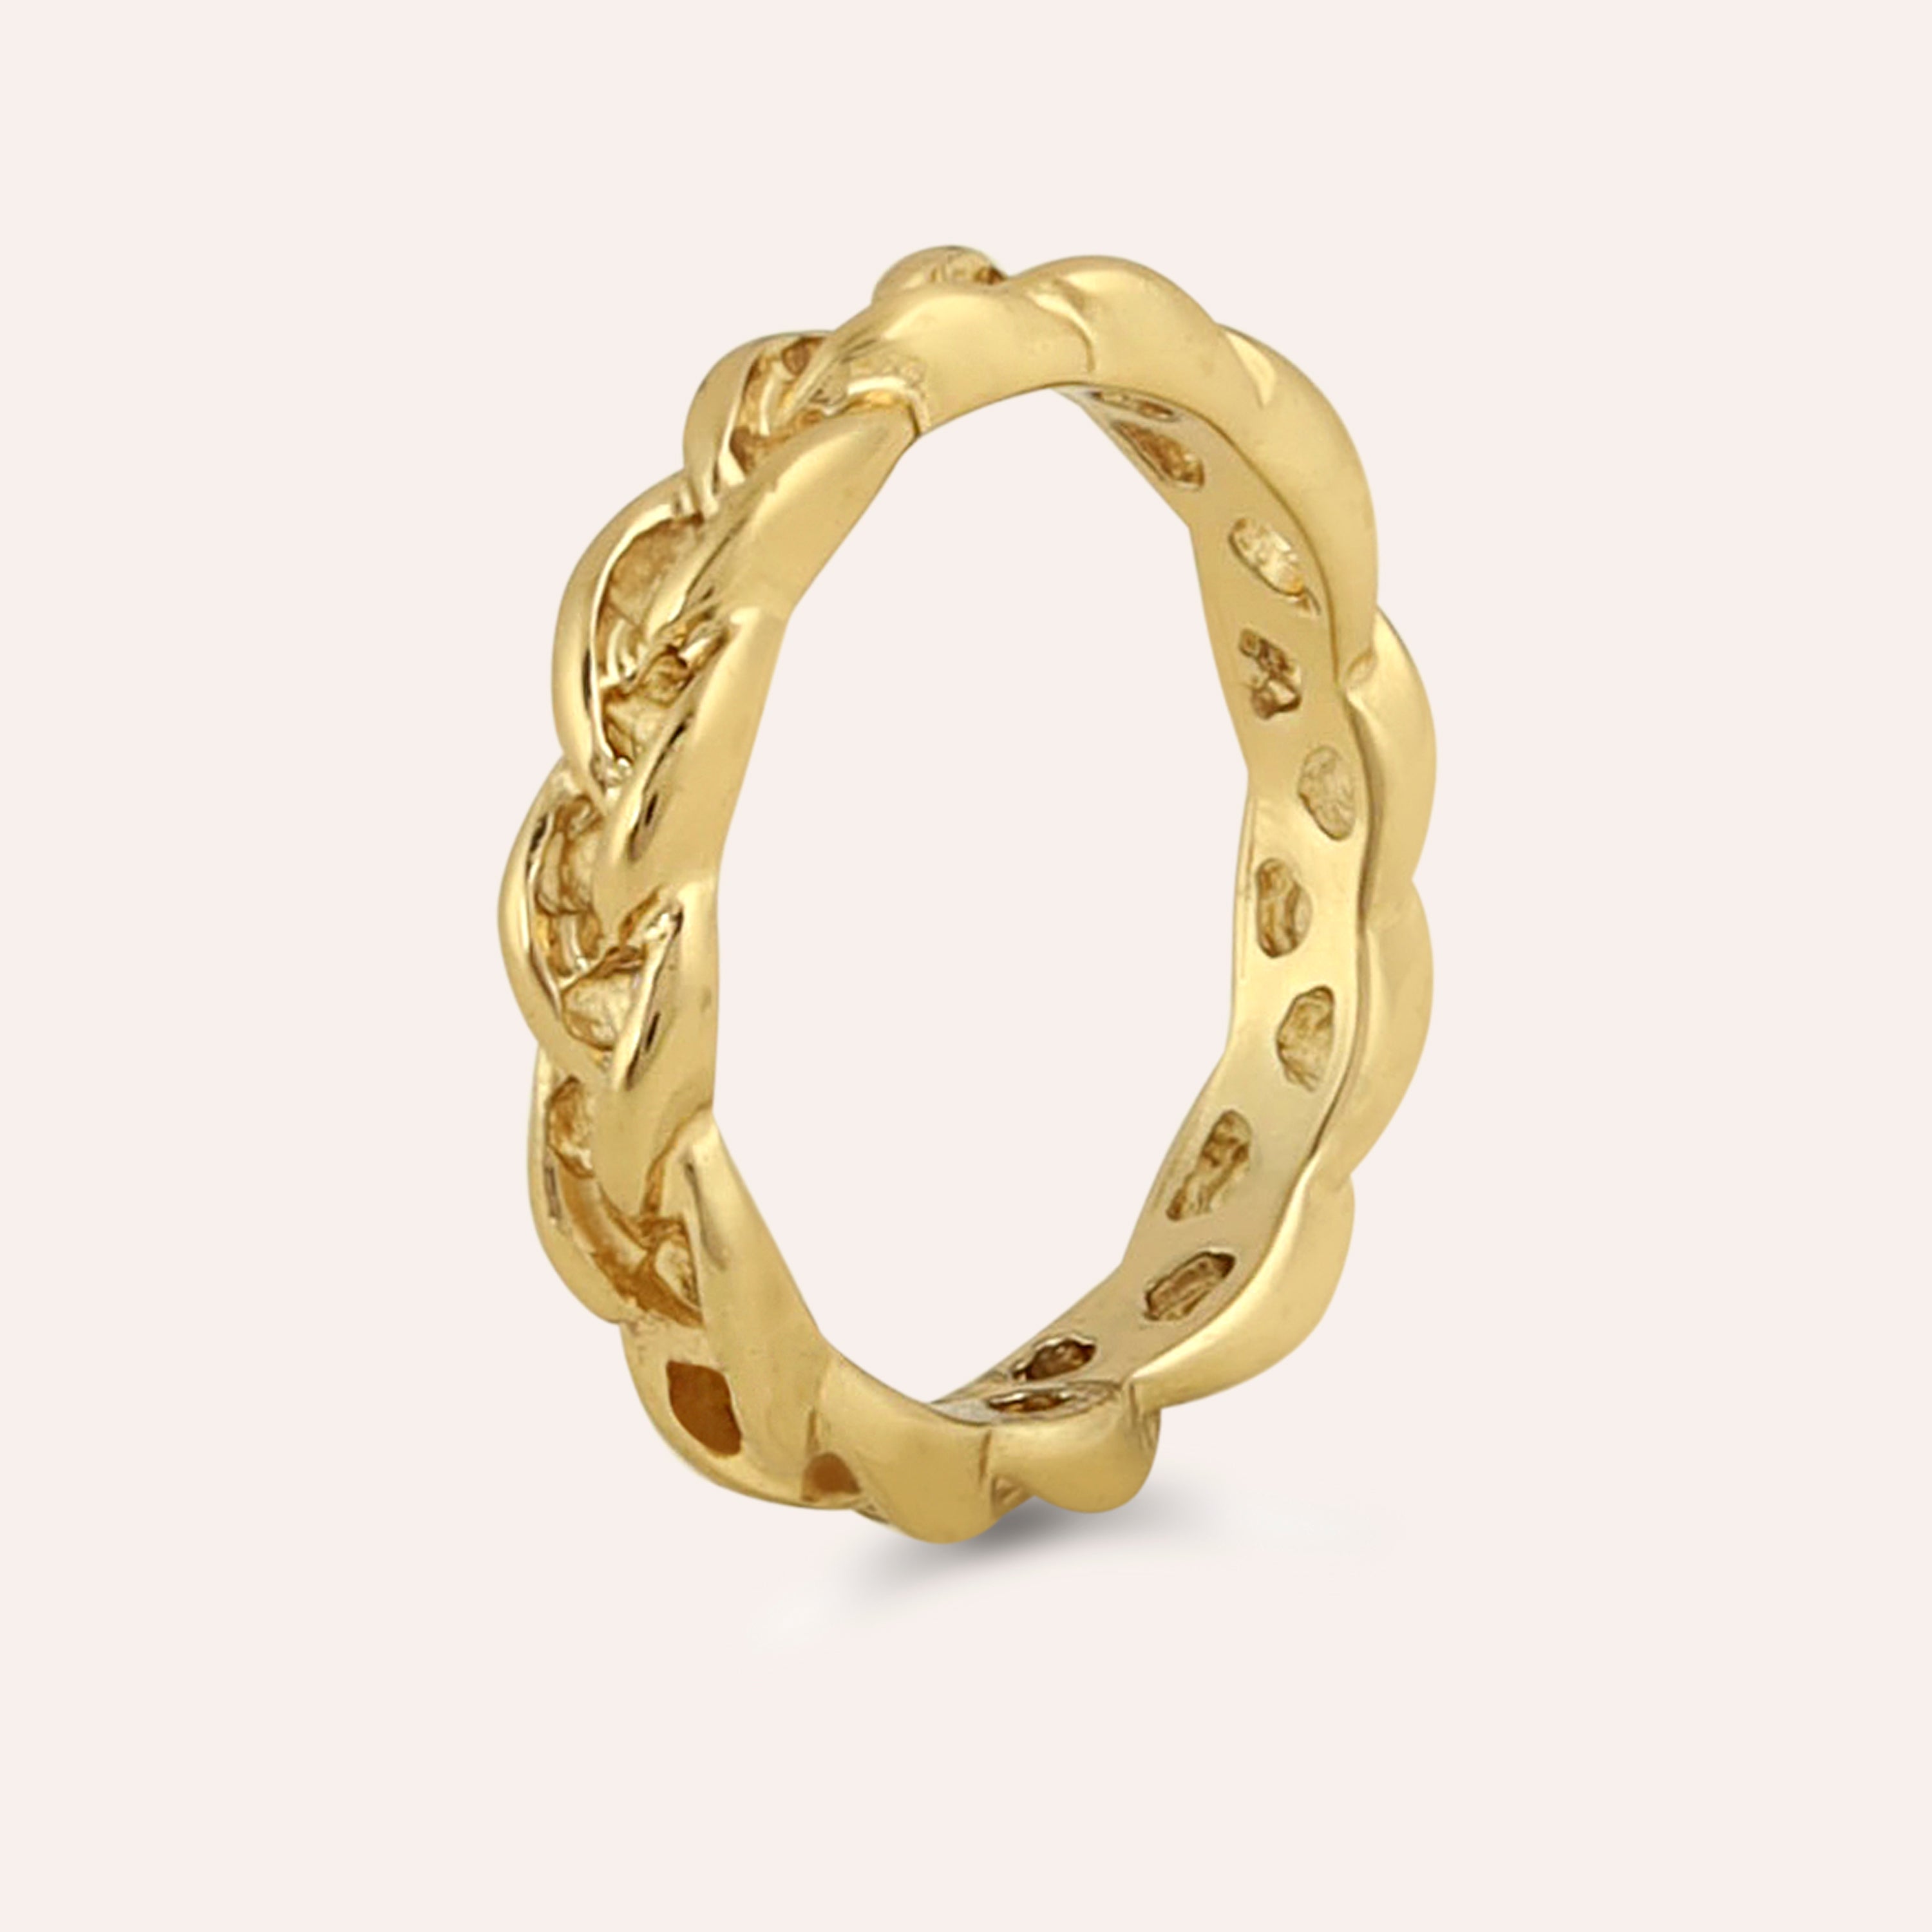 TFC Braidwhisper Gold Plated Ring- Elevate your style with our exquisite collection of gold-plated adjustable rings for women, including timeless signet rings. Explore cheapest fashion jewellery designs with anti-tarnish properties, all at The Fun Company with a touch of elegance